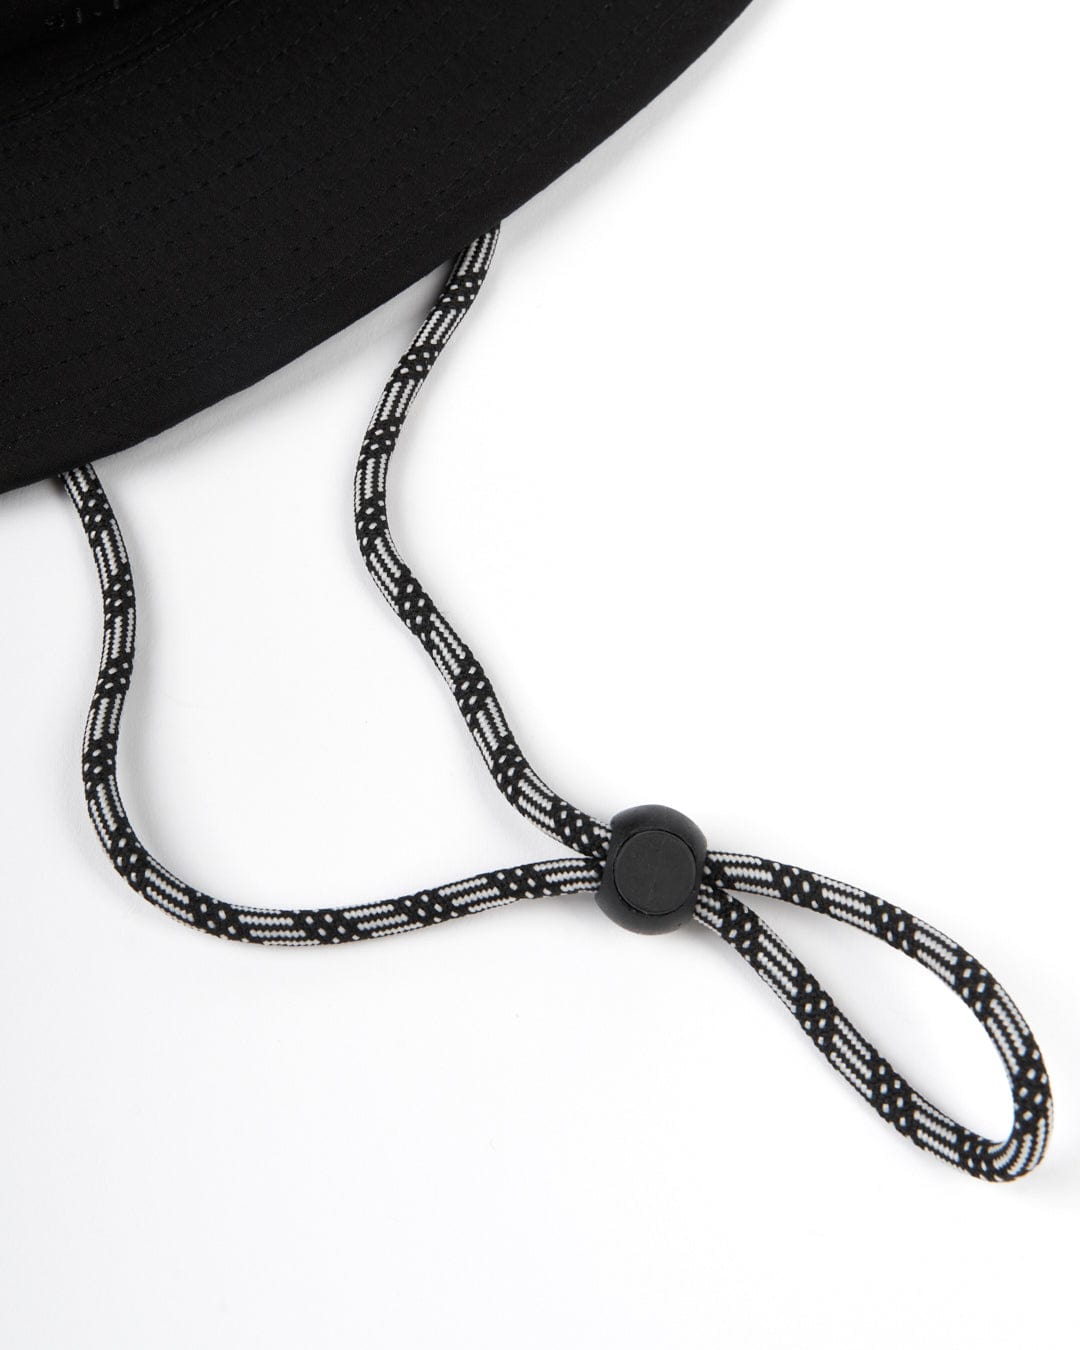 A Saltrock black bucket hat with UPF protection and a rope attached to it.